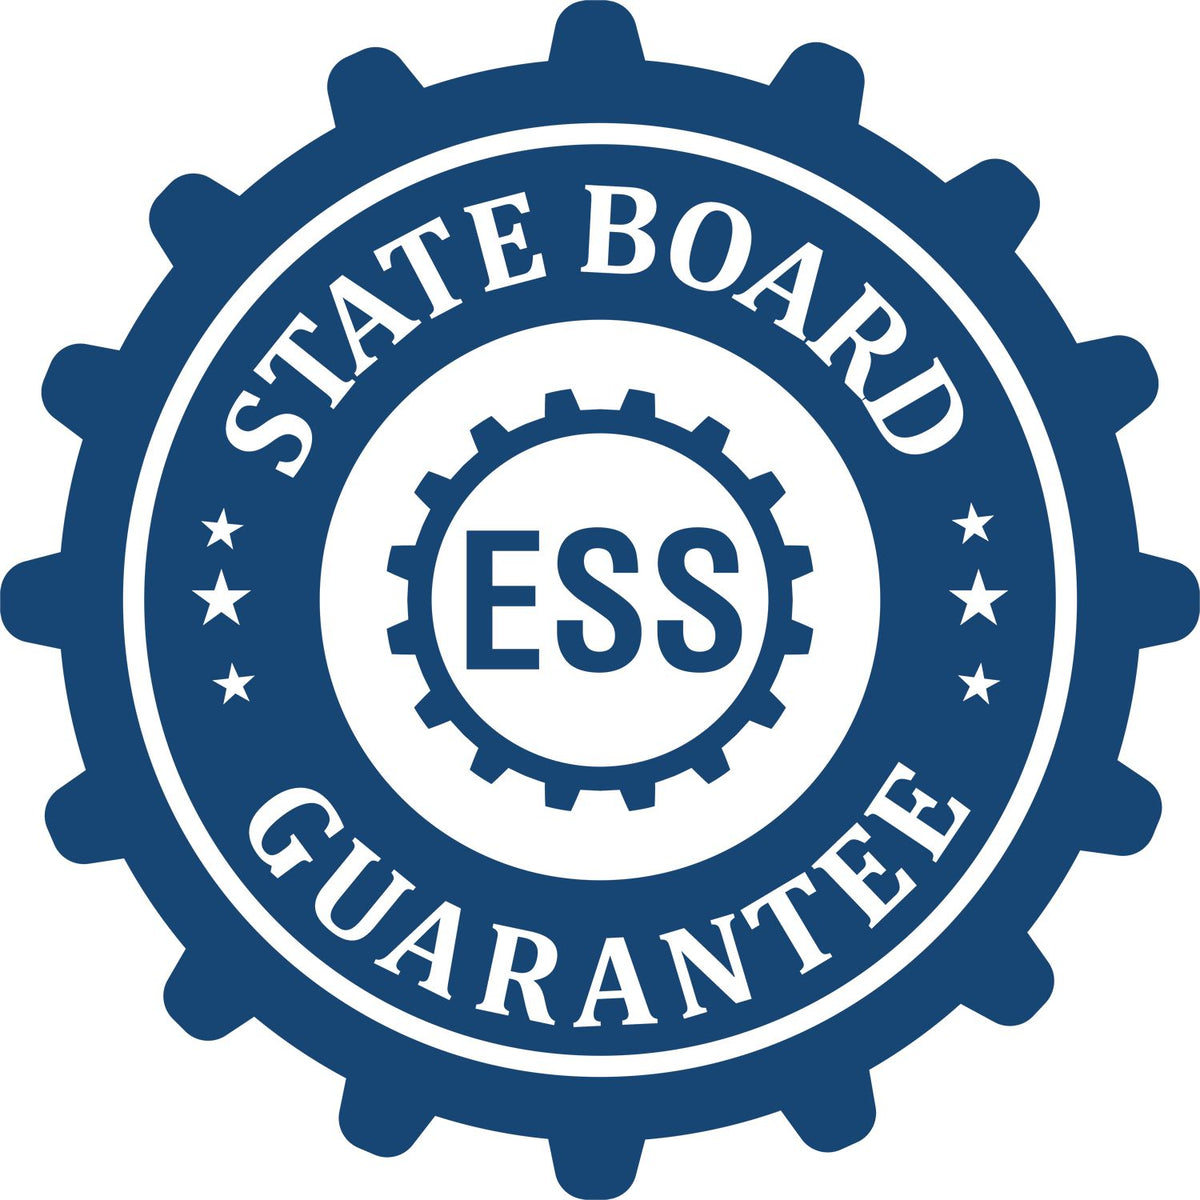 An emblem in a gear shape illustrating a state board guarantee for the Heavy Duty Cast Iron Montana Geologist Seal Embosser